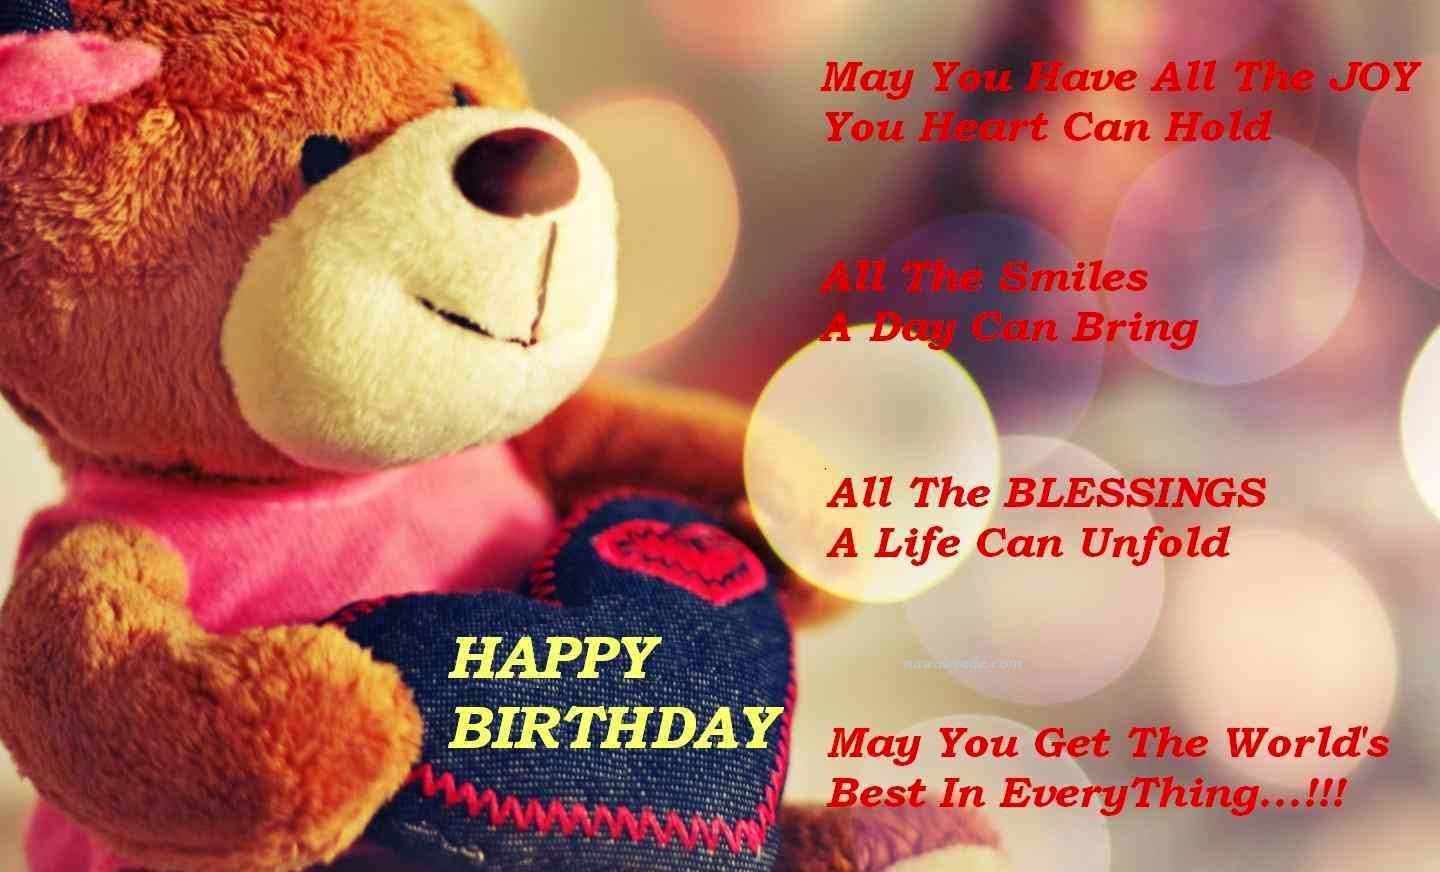 Happy Birthday Wishes Quotes For Best Friend This Blog About Health